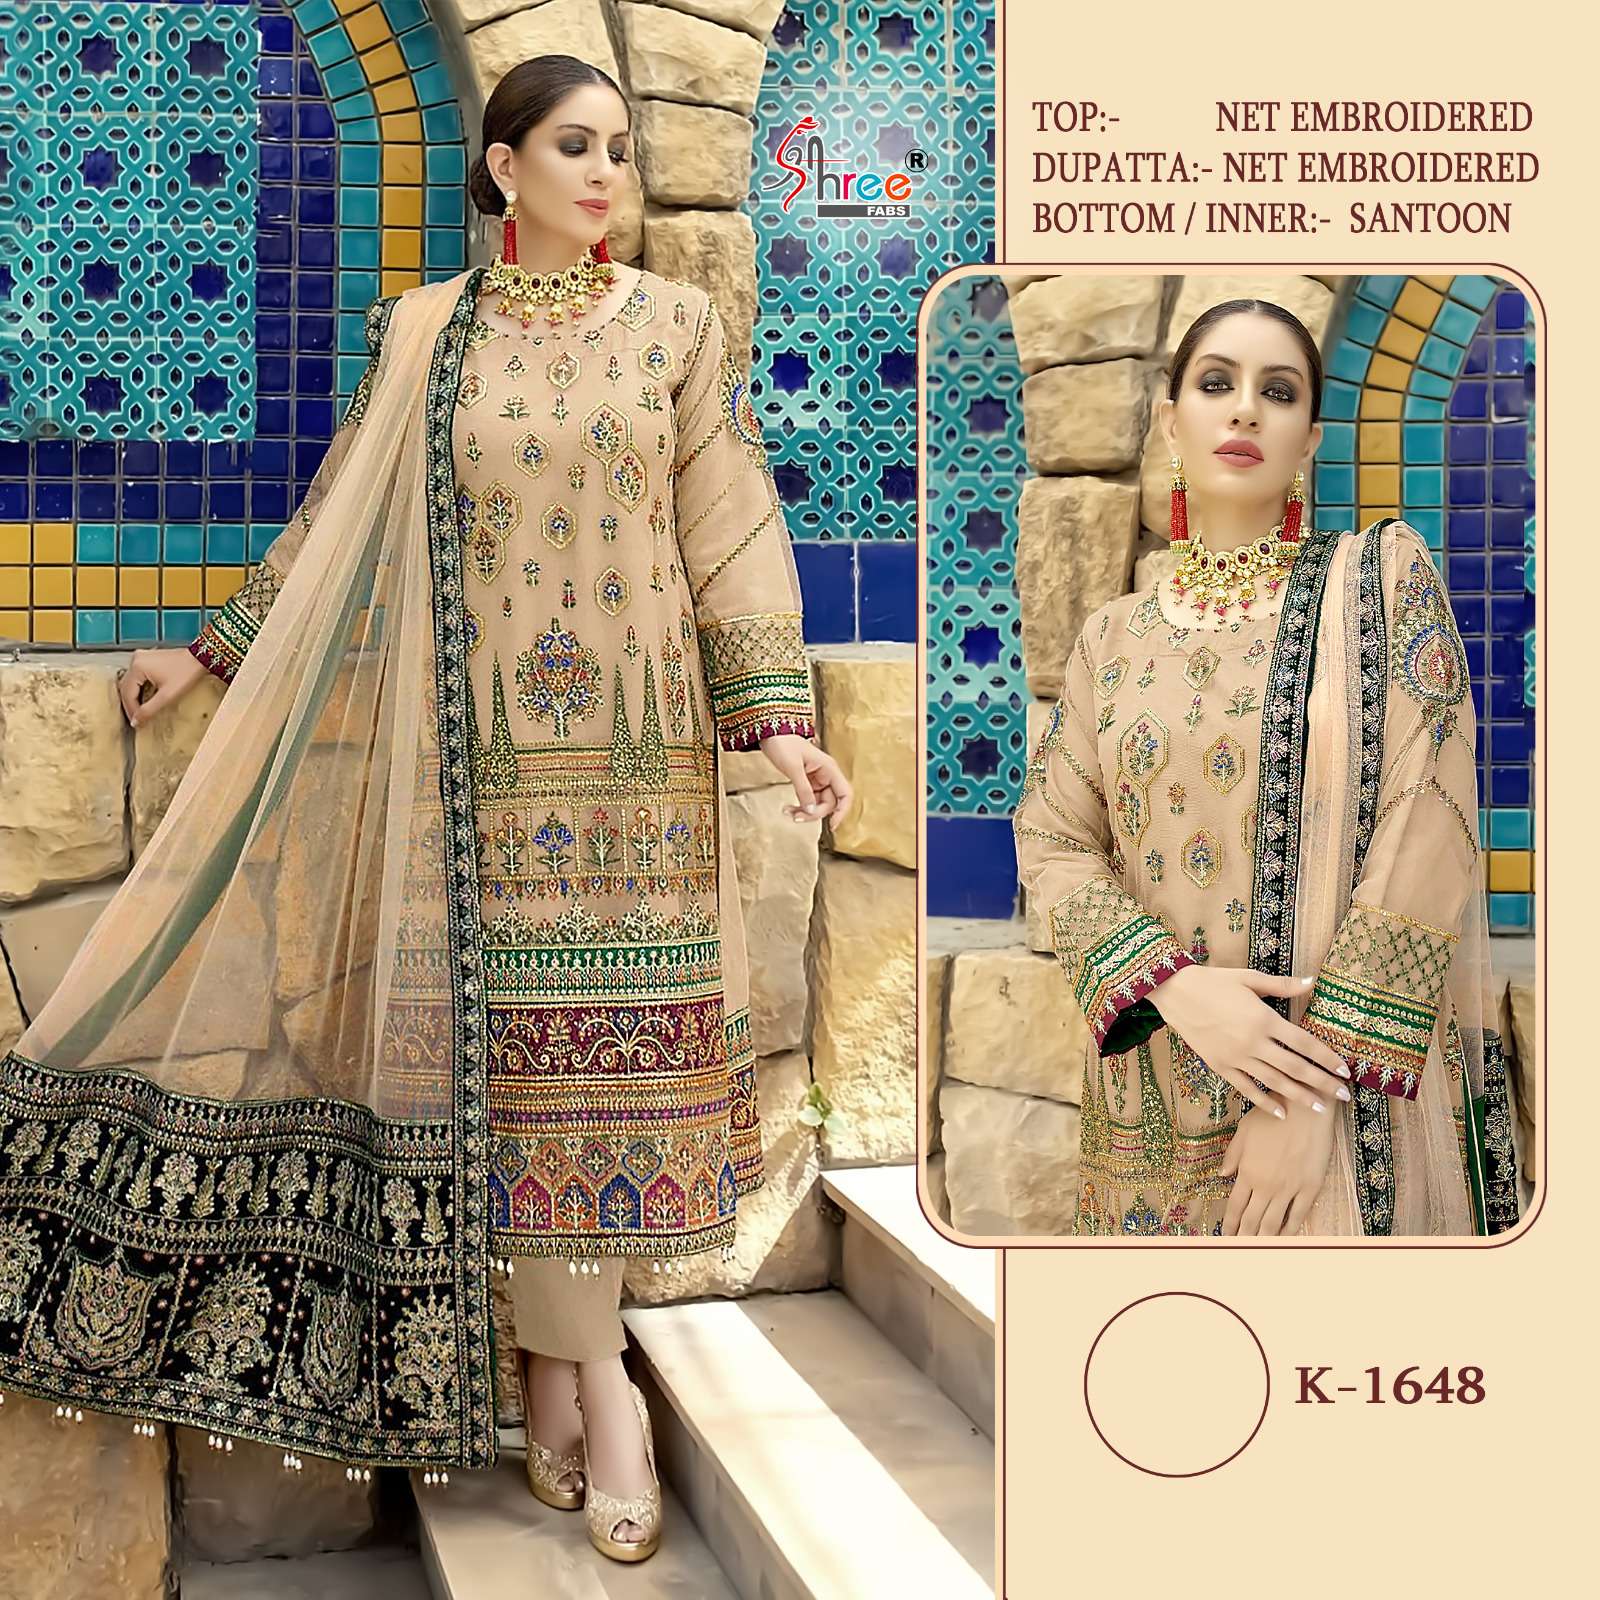 SHREE FABS K 1648 NET WITH EMBROIDERY SALWAR SUITS AT WHOLES...